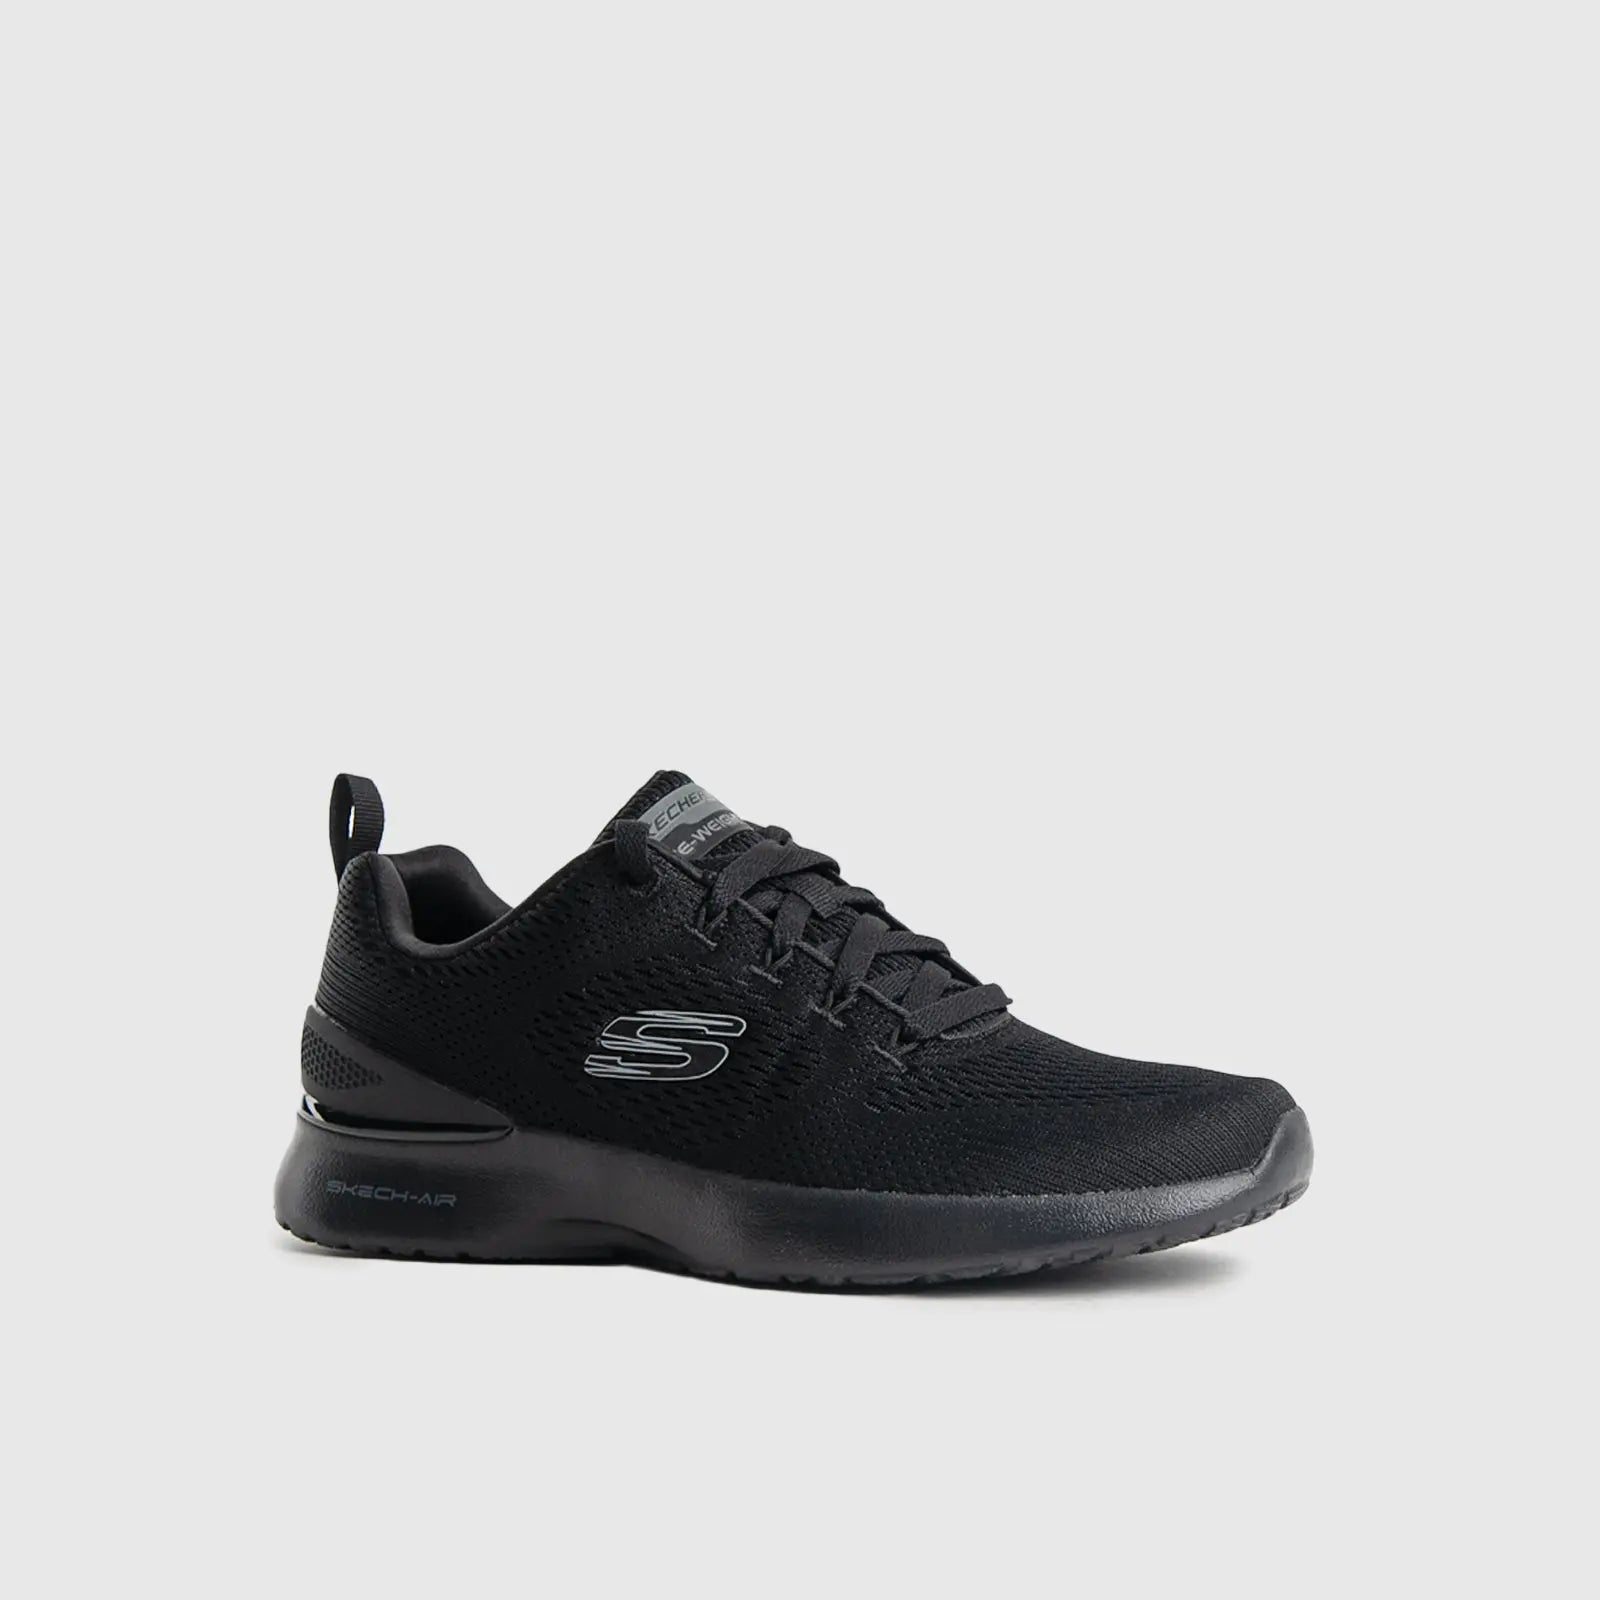 Skechers Comfort Lace Up Skech Air Dynamight Black 232693 Gents | familyshoecentre